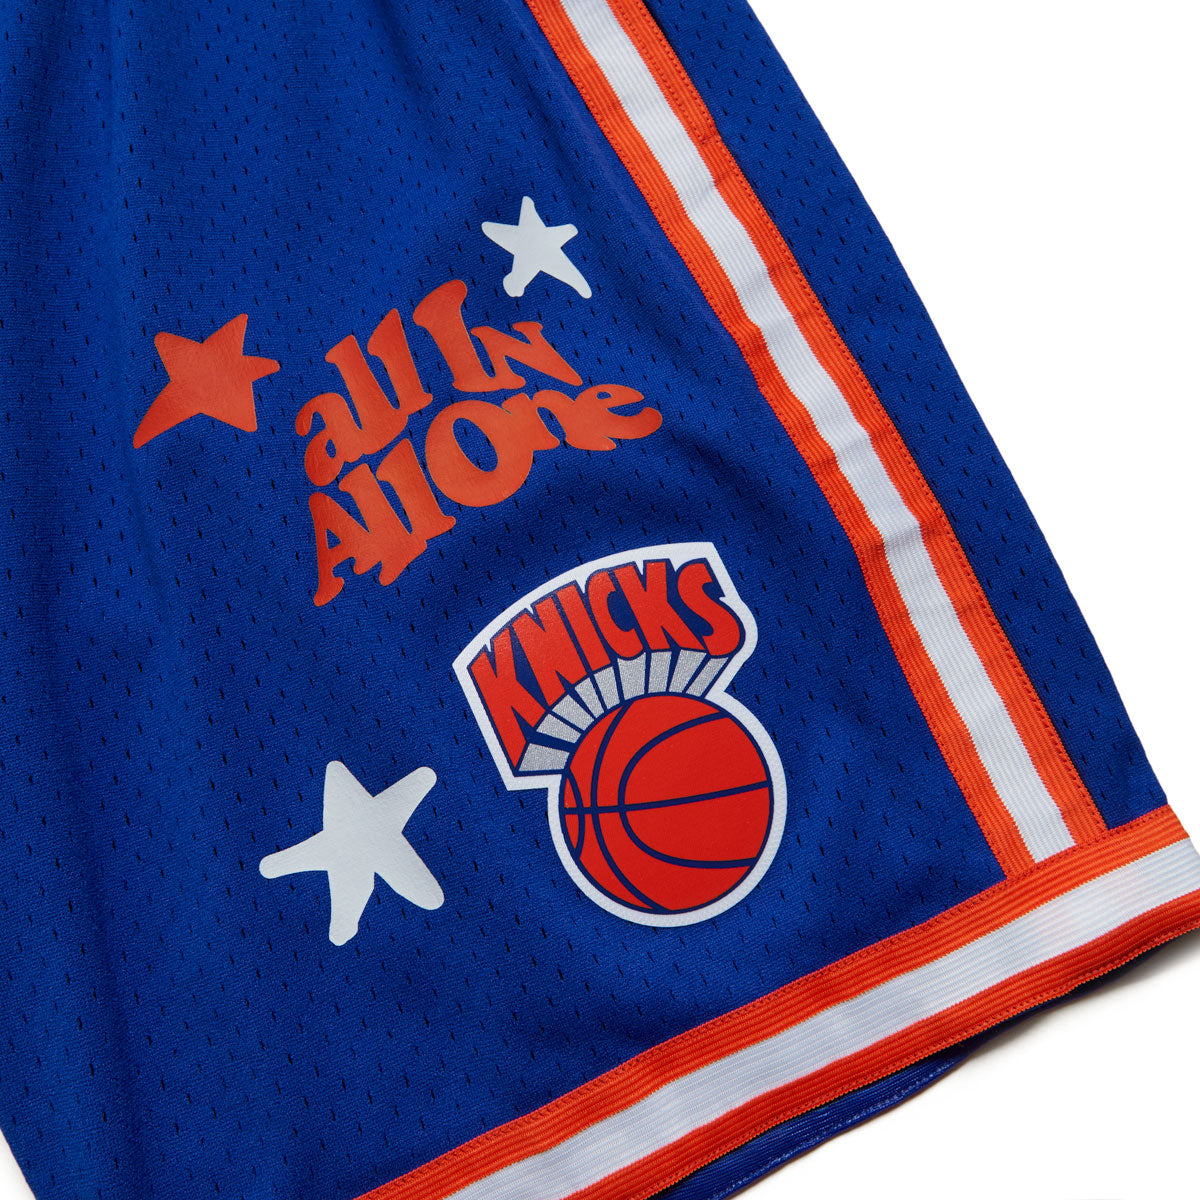 Mitchell & Ness All In One Knicks Shorts - Patrick Ewing image 5